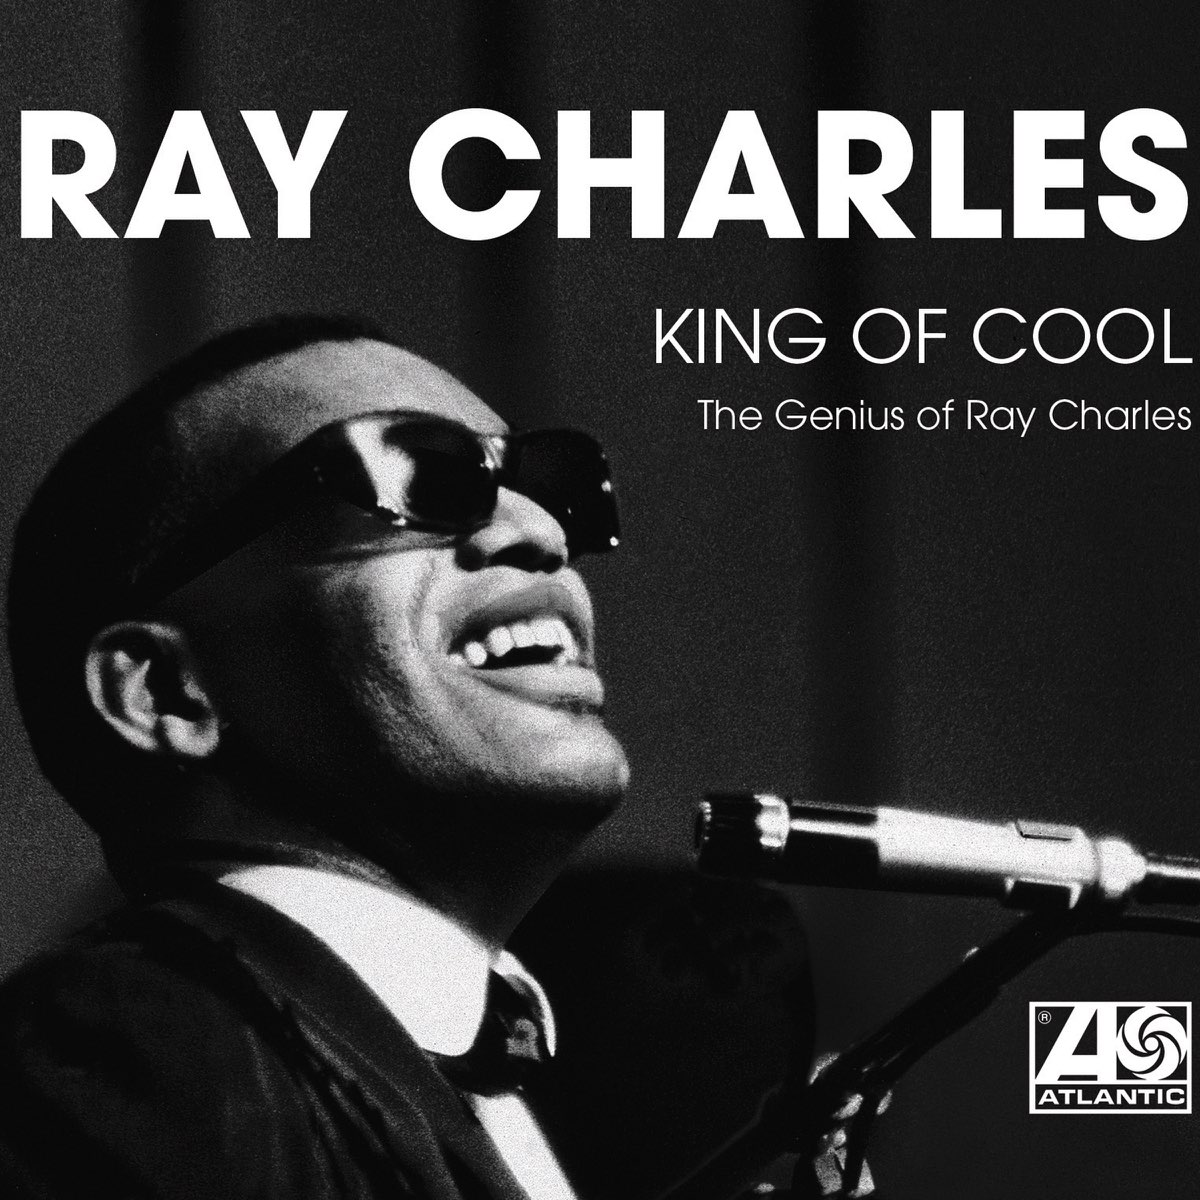 King of Cool: The Genius of Ray Charles par Ray Charles sur Apple Music